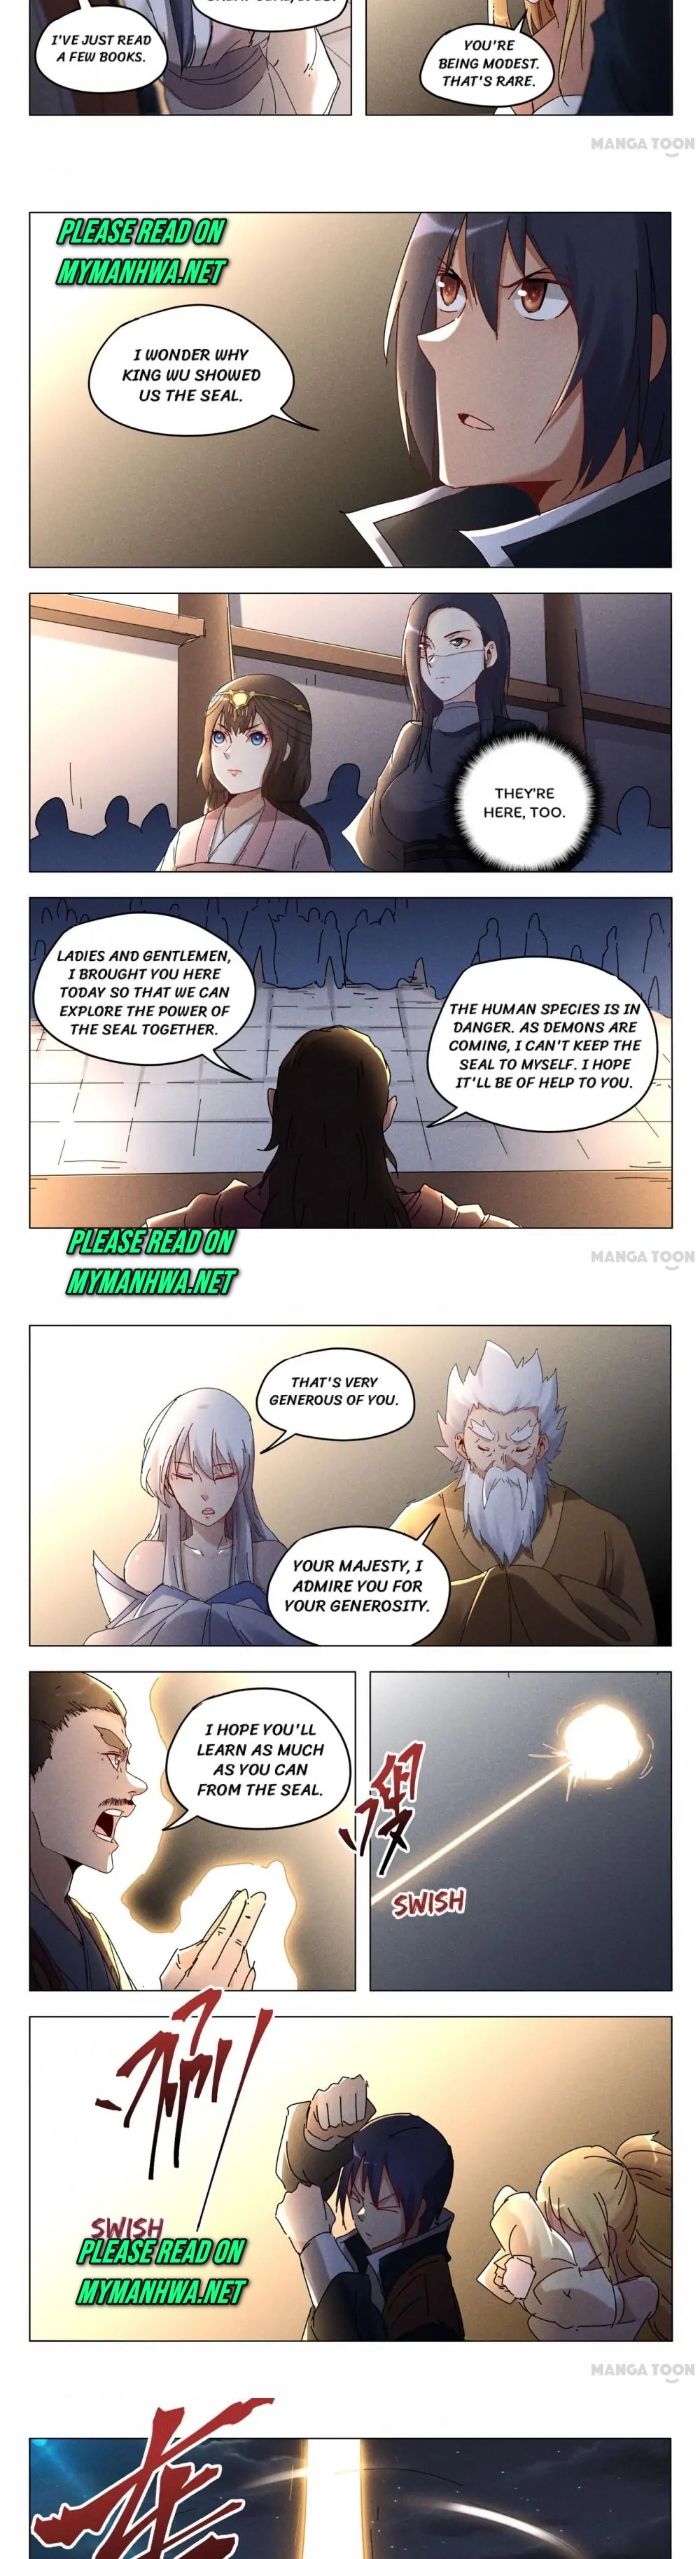 Master of Legendary Realms Chapter 420 page 2